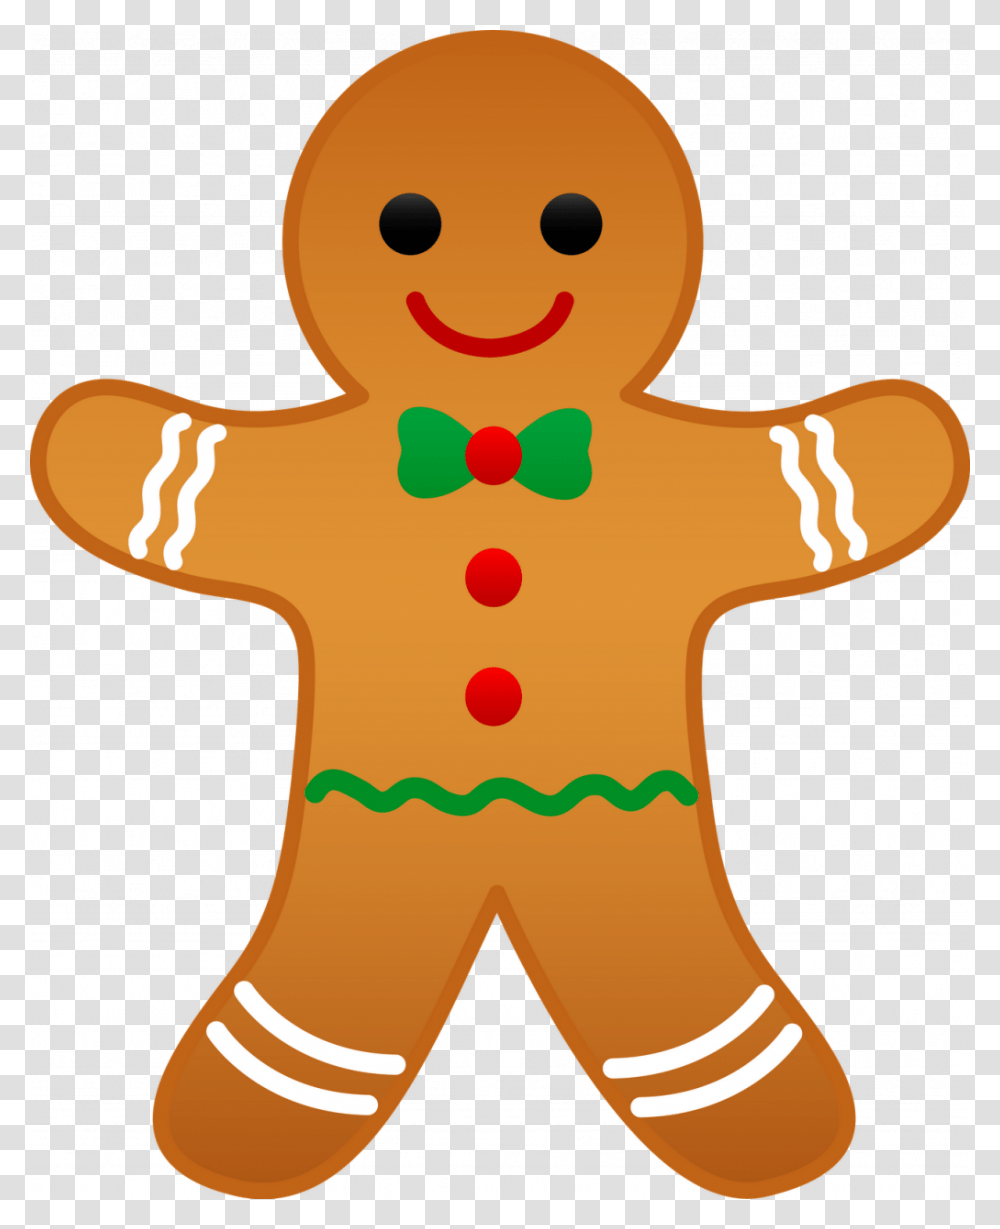 Christmas Christmas Tree Clip Art Best And Holiday Christmas Gingerbread Man Clipart, Cookie, Food, Biscuit Transparent Png